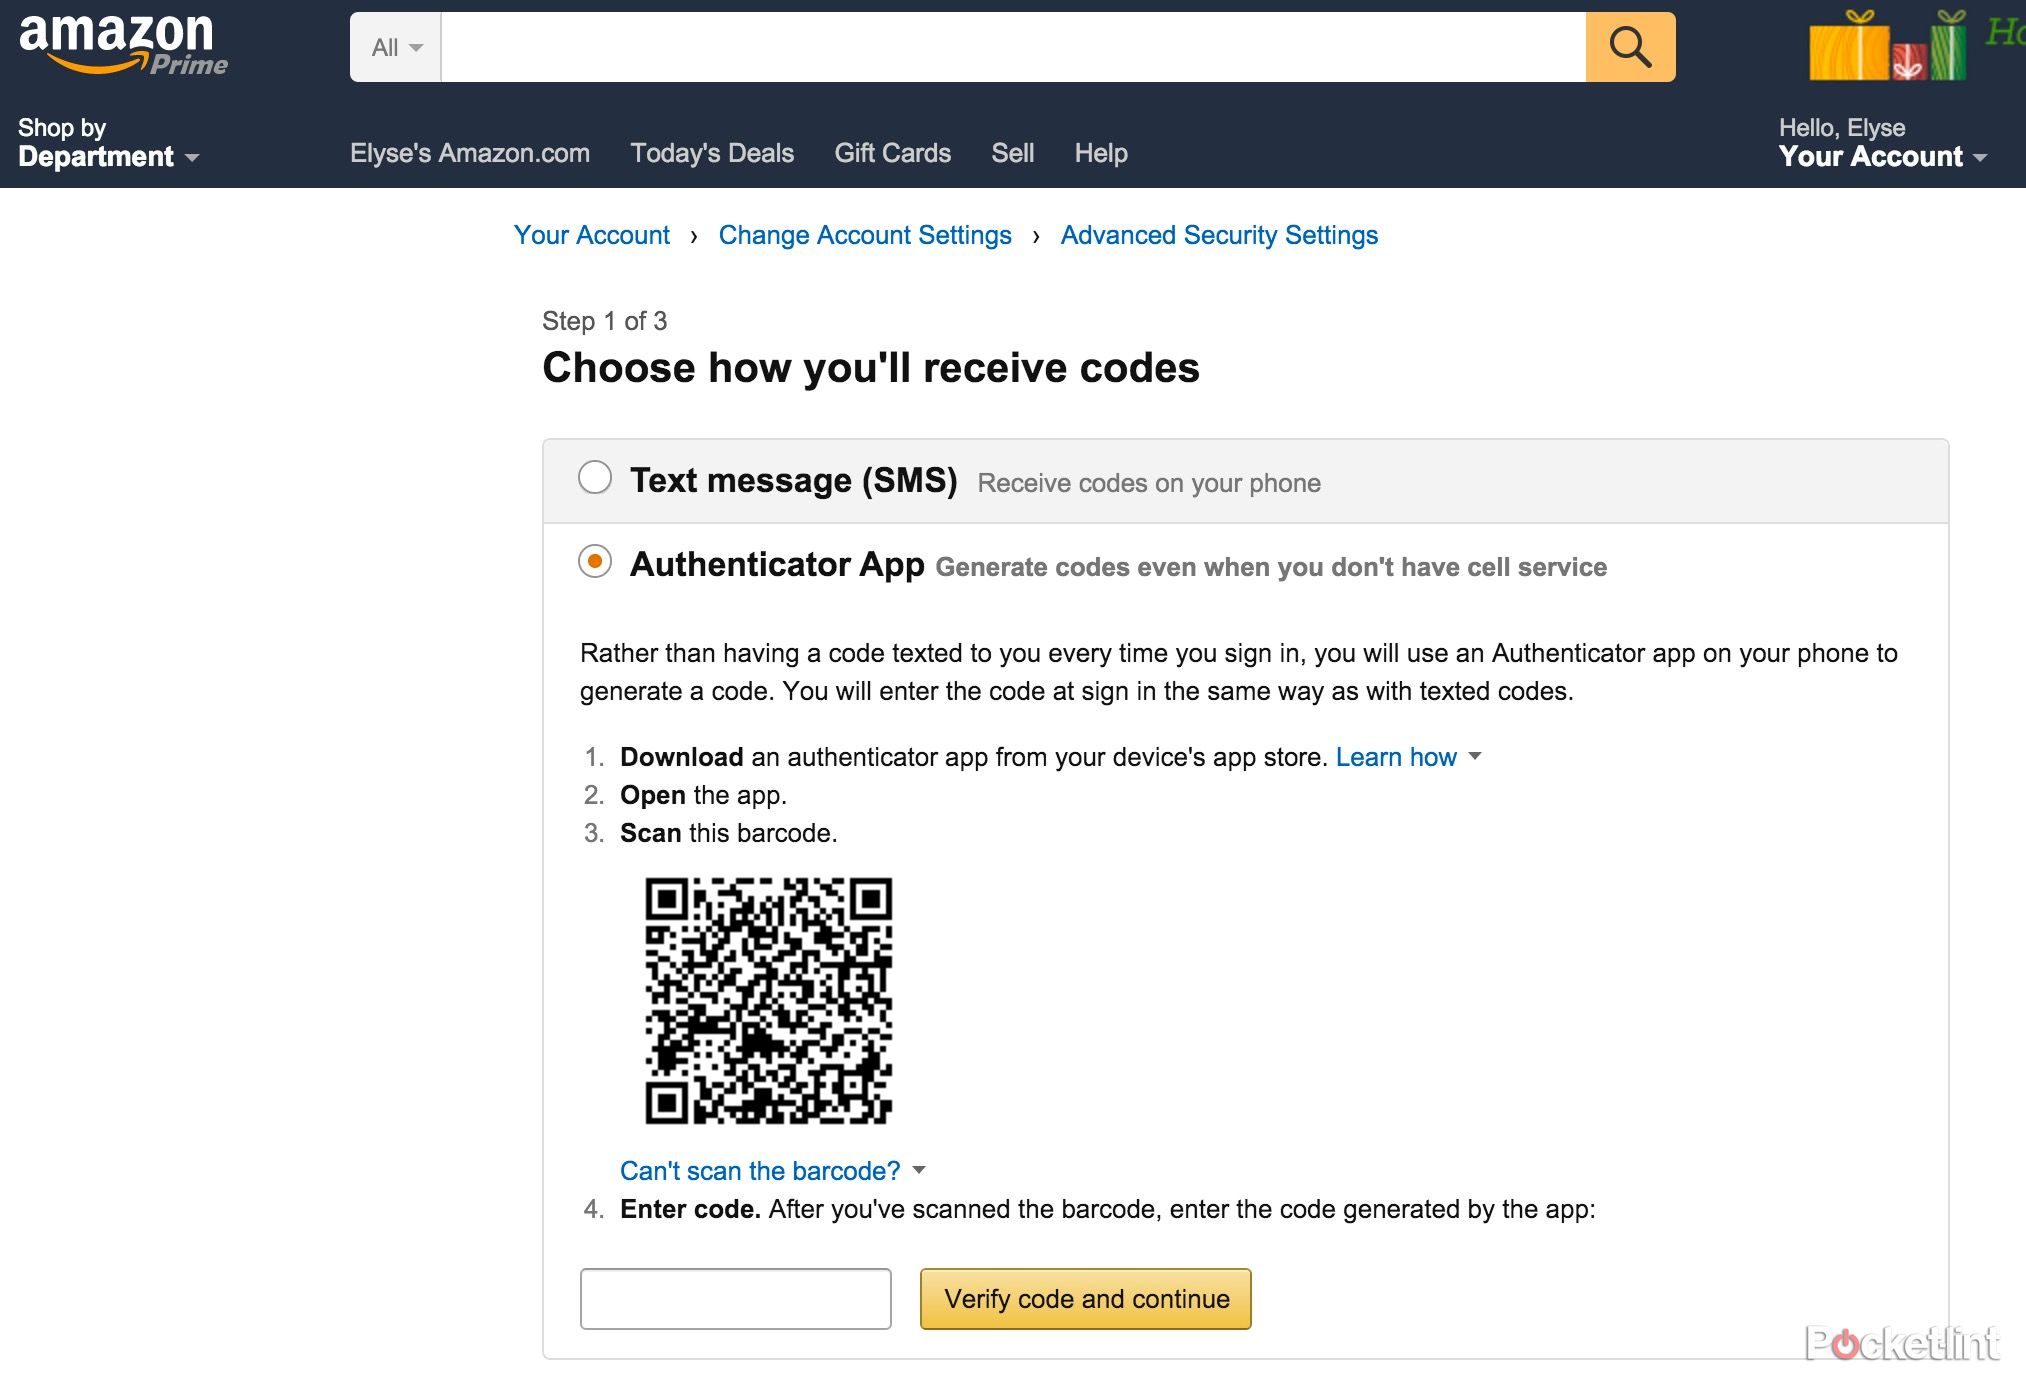 how to enable two step verification on amazon image 2